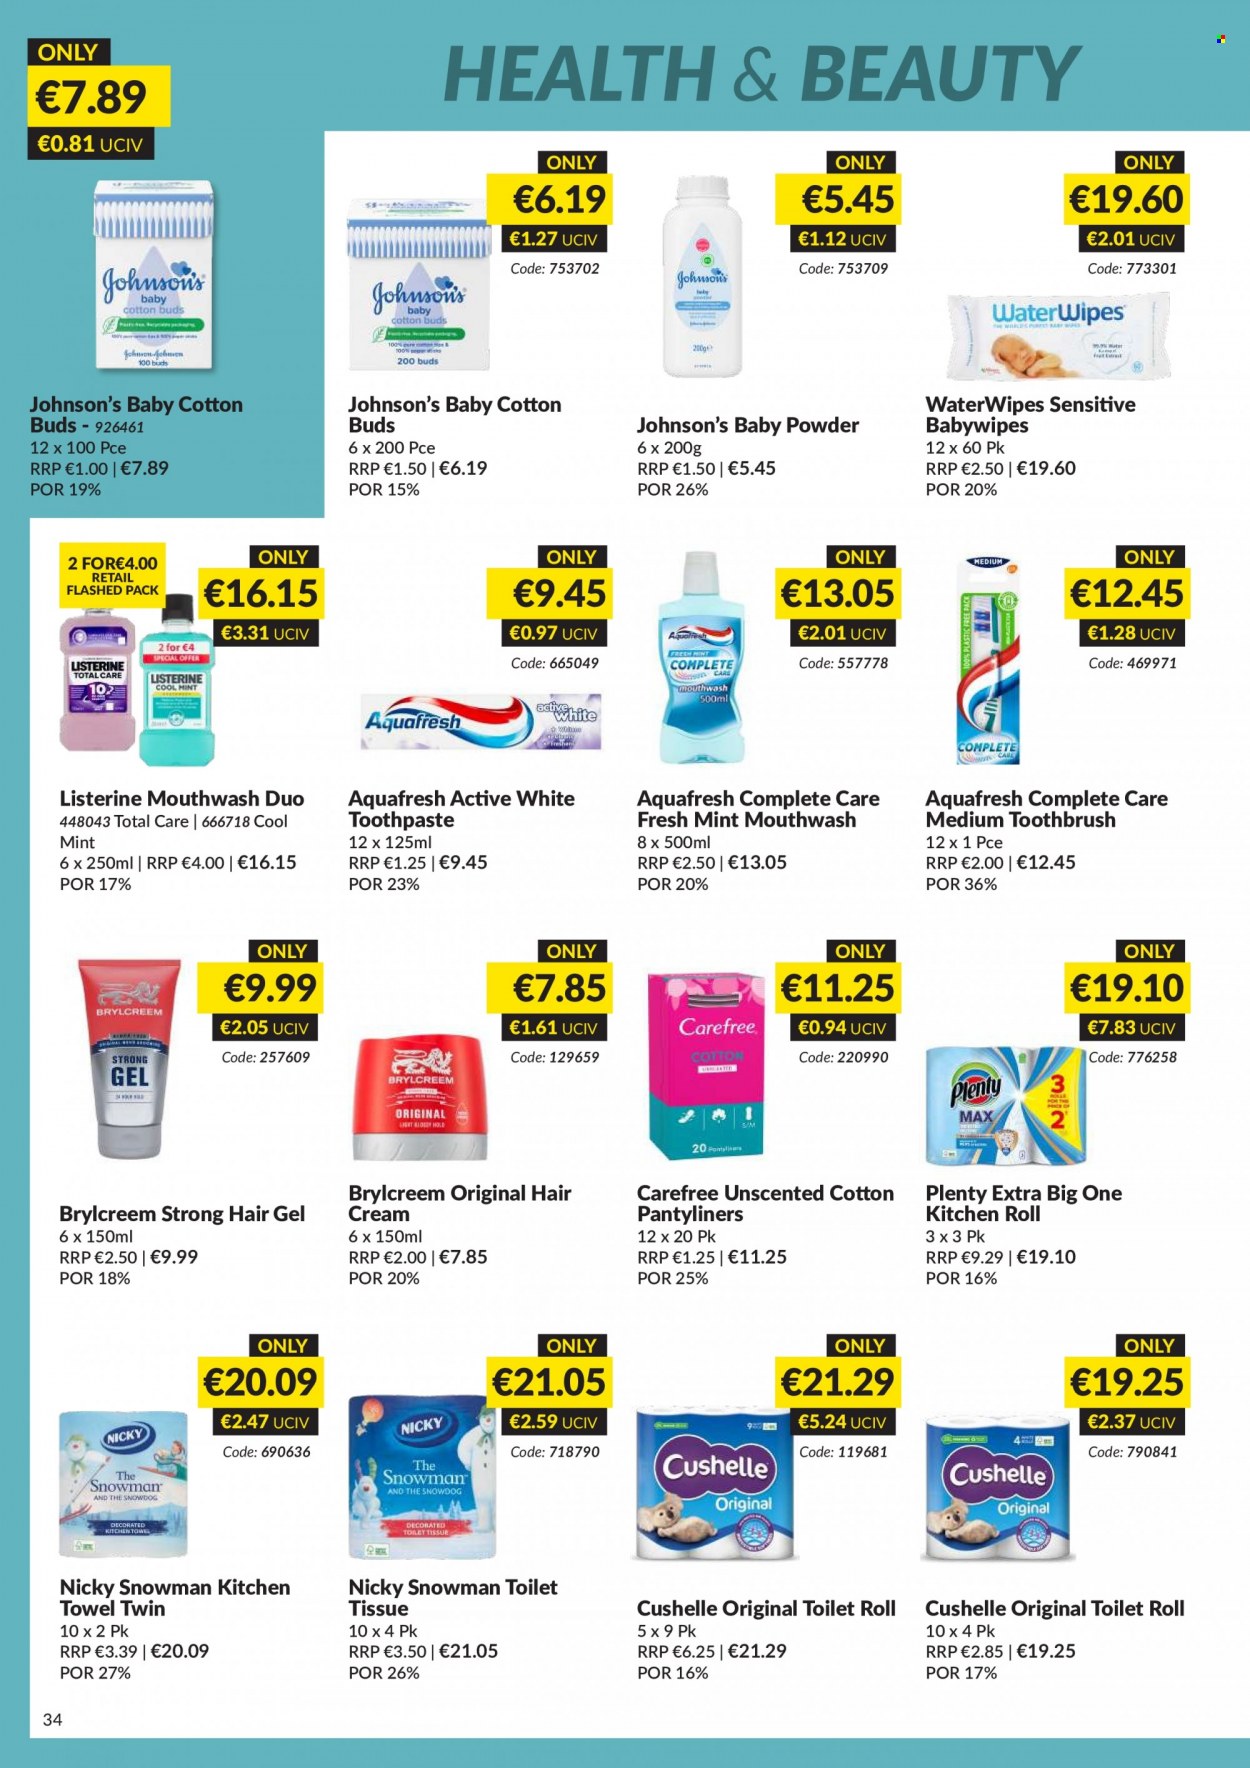 thumbnail - MUSGRAVE Market Place offer  - 20.11.2022 - 31.12.2022 - Sales products - Johnson's, baby powder, toilet paper, Plenty, kitchen towels, Cushelle, Listerine, toothbrush, toothpaste, mouthwash, Carefree, pantyliners, hair cream, kitchen rolls. Page 34.